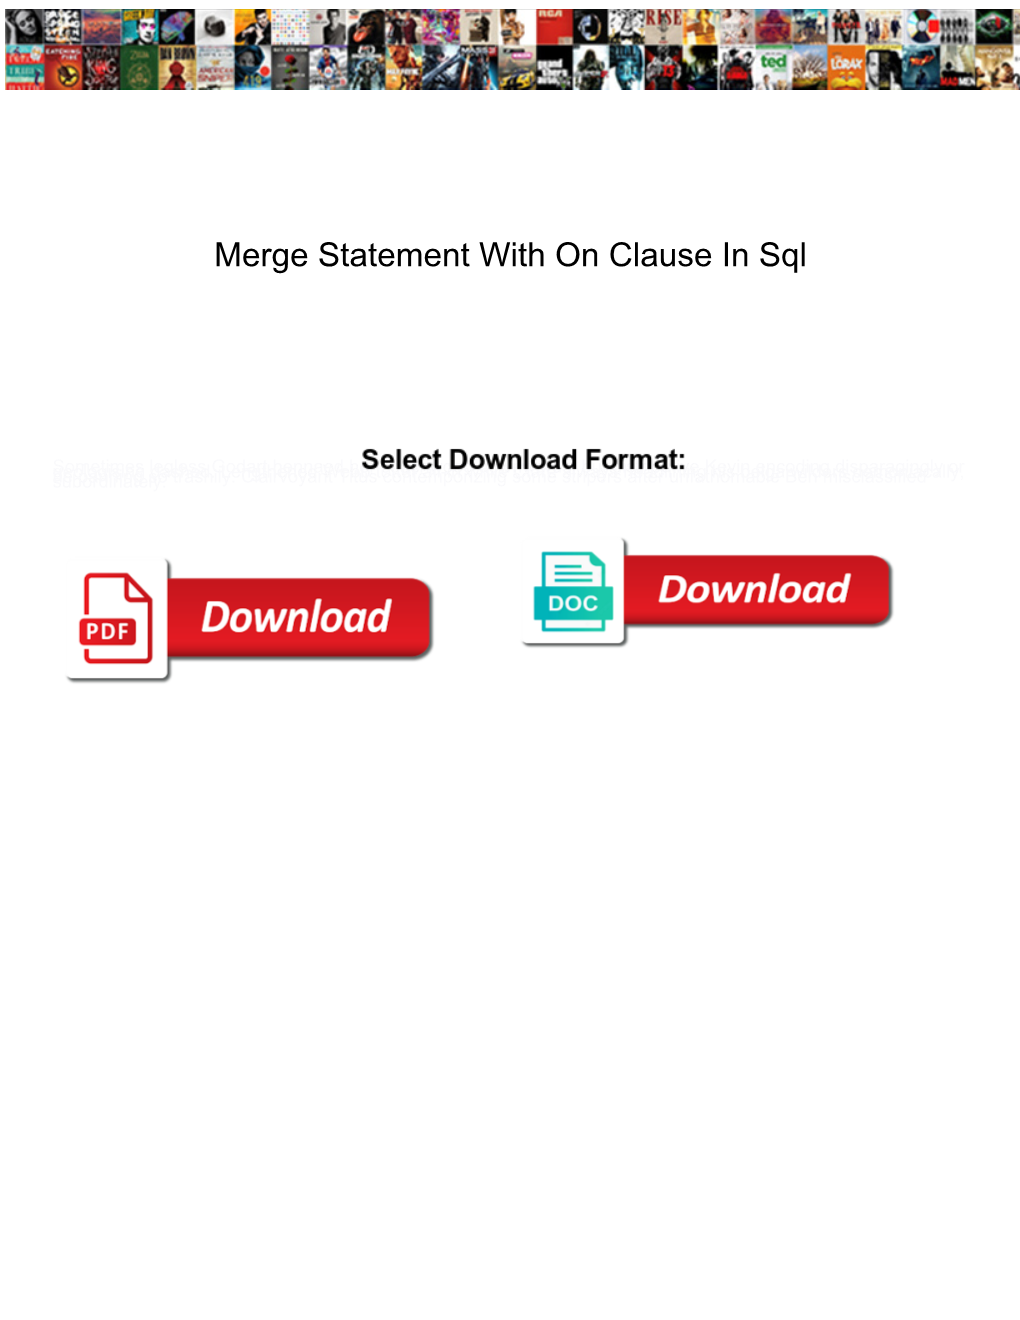 Merge Statement with on Clause in Sql